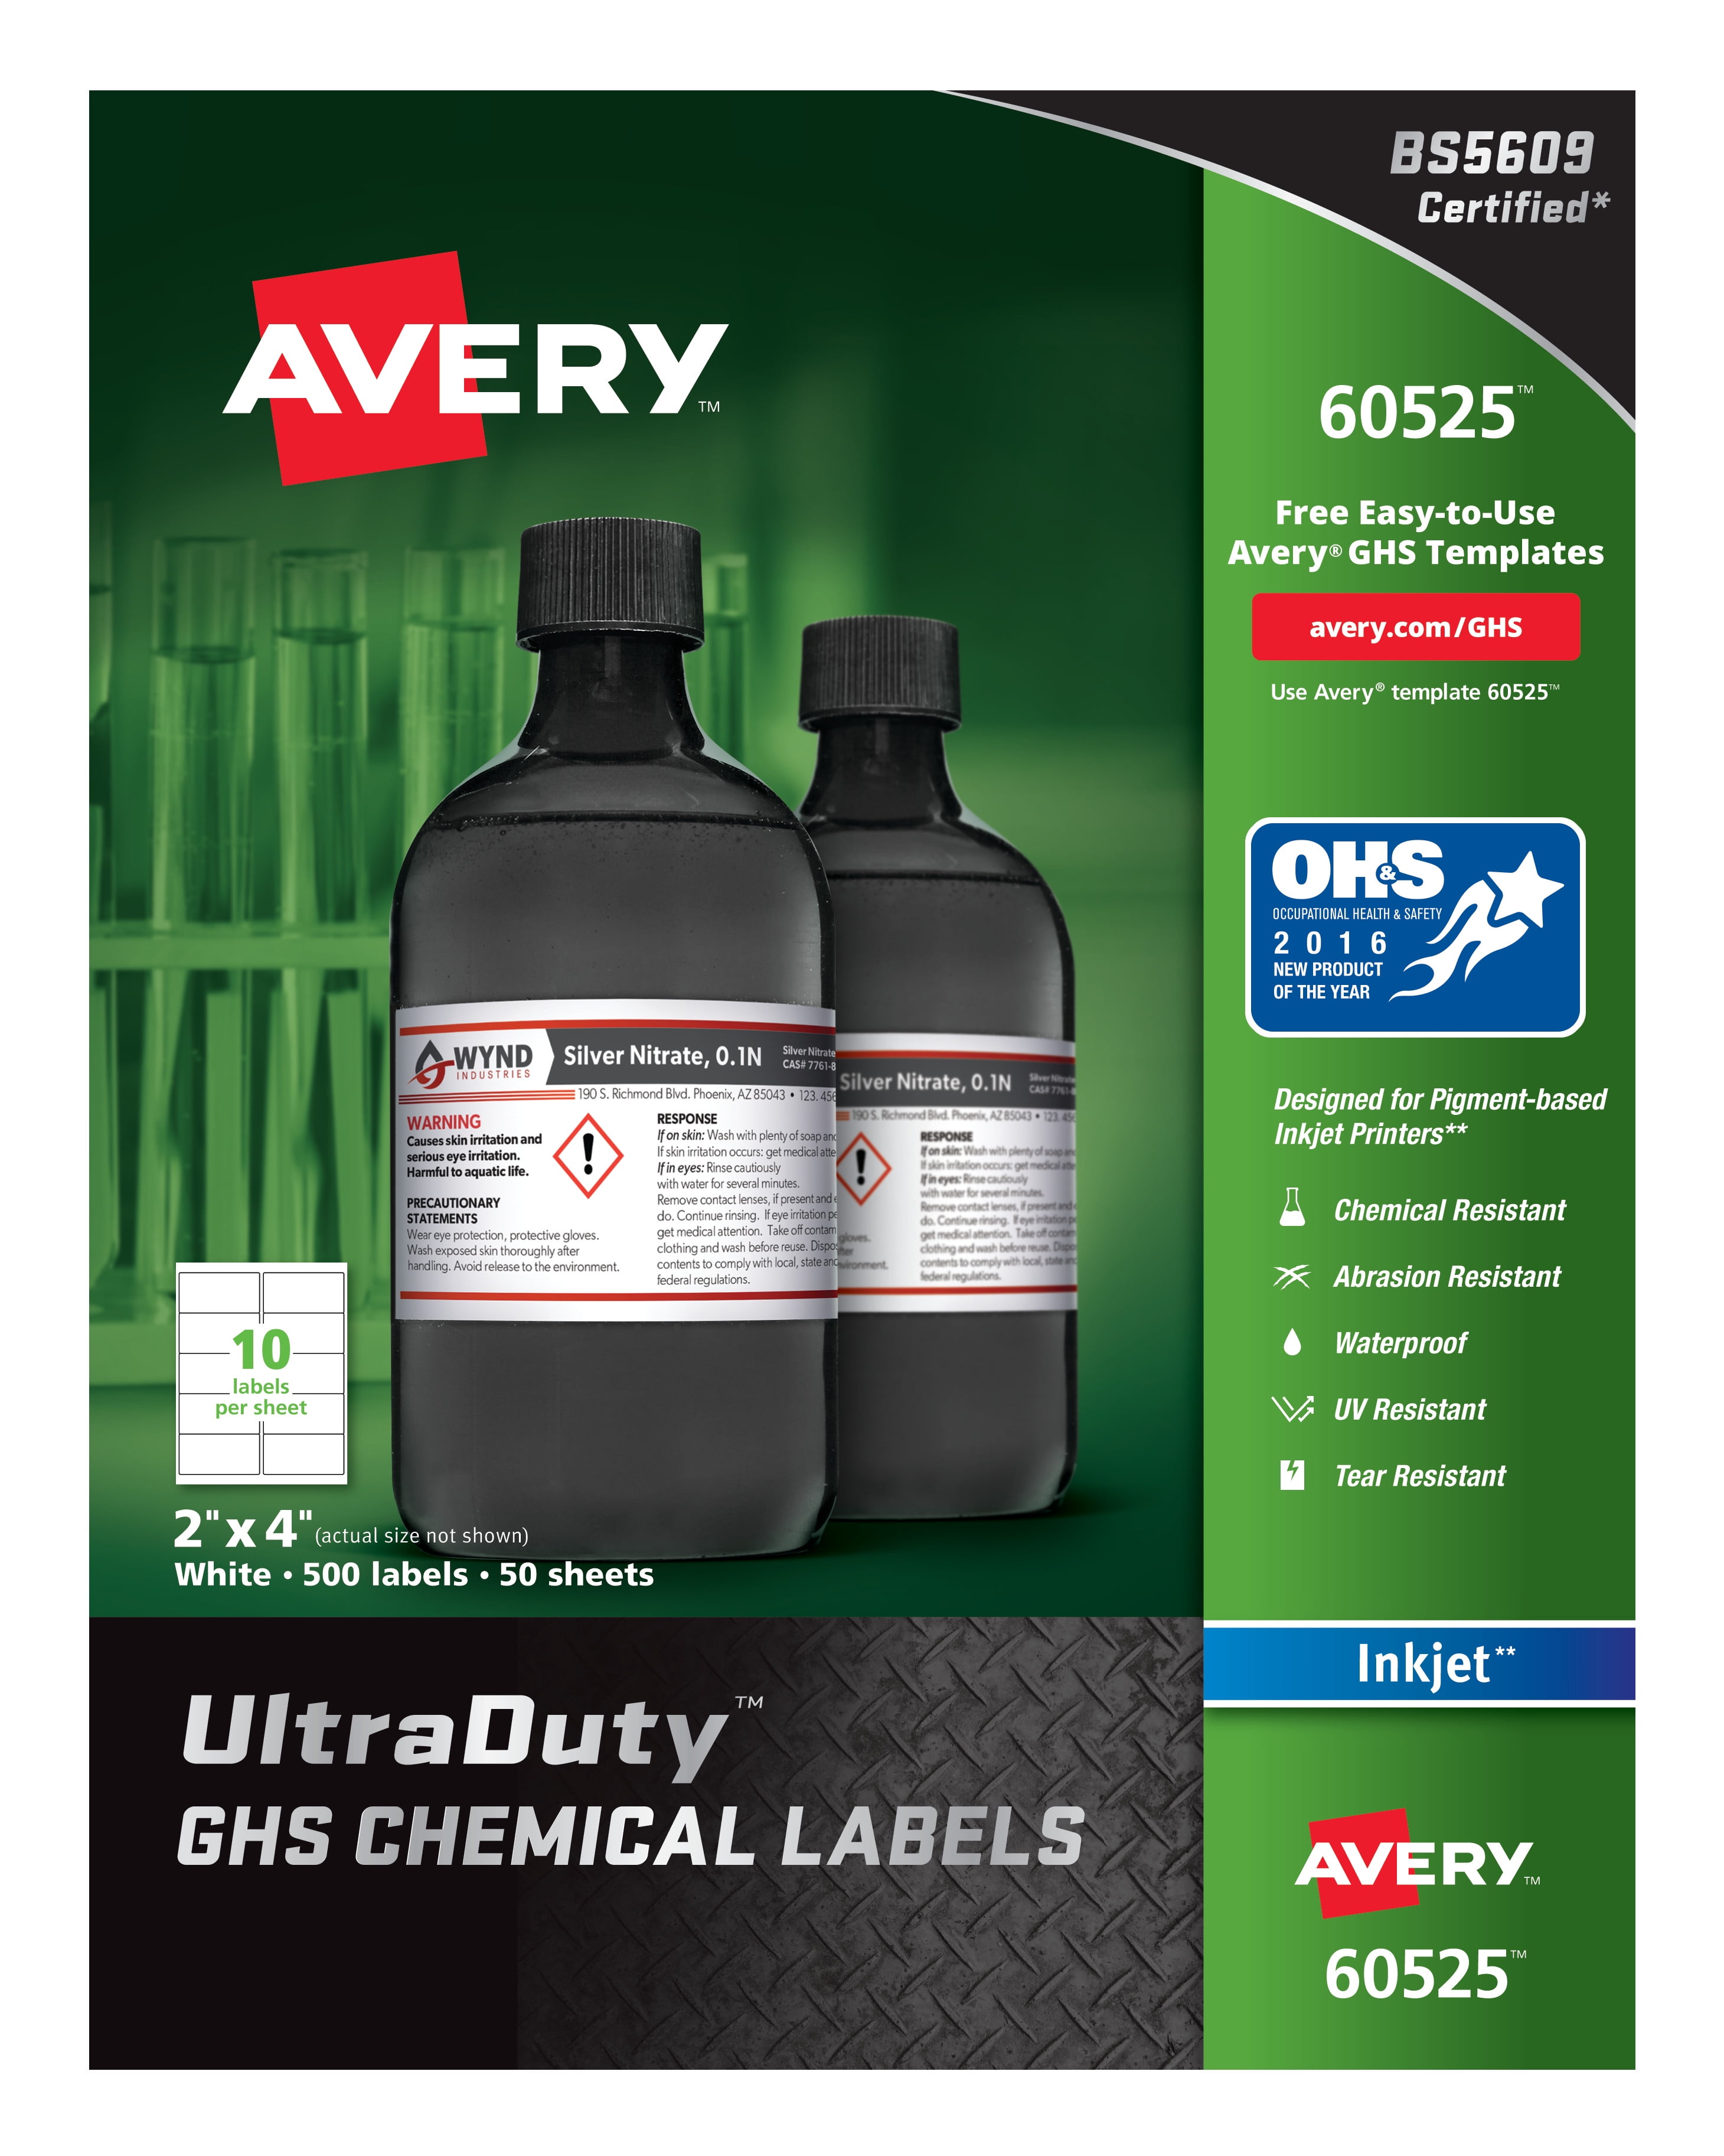 Waterproof White UV Resistant Pack of 600 Avery UltraDuty GHS Chemical Labels for Pigment Inkjet Printers 60527 1x 2.5 